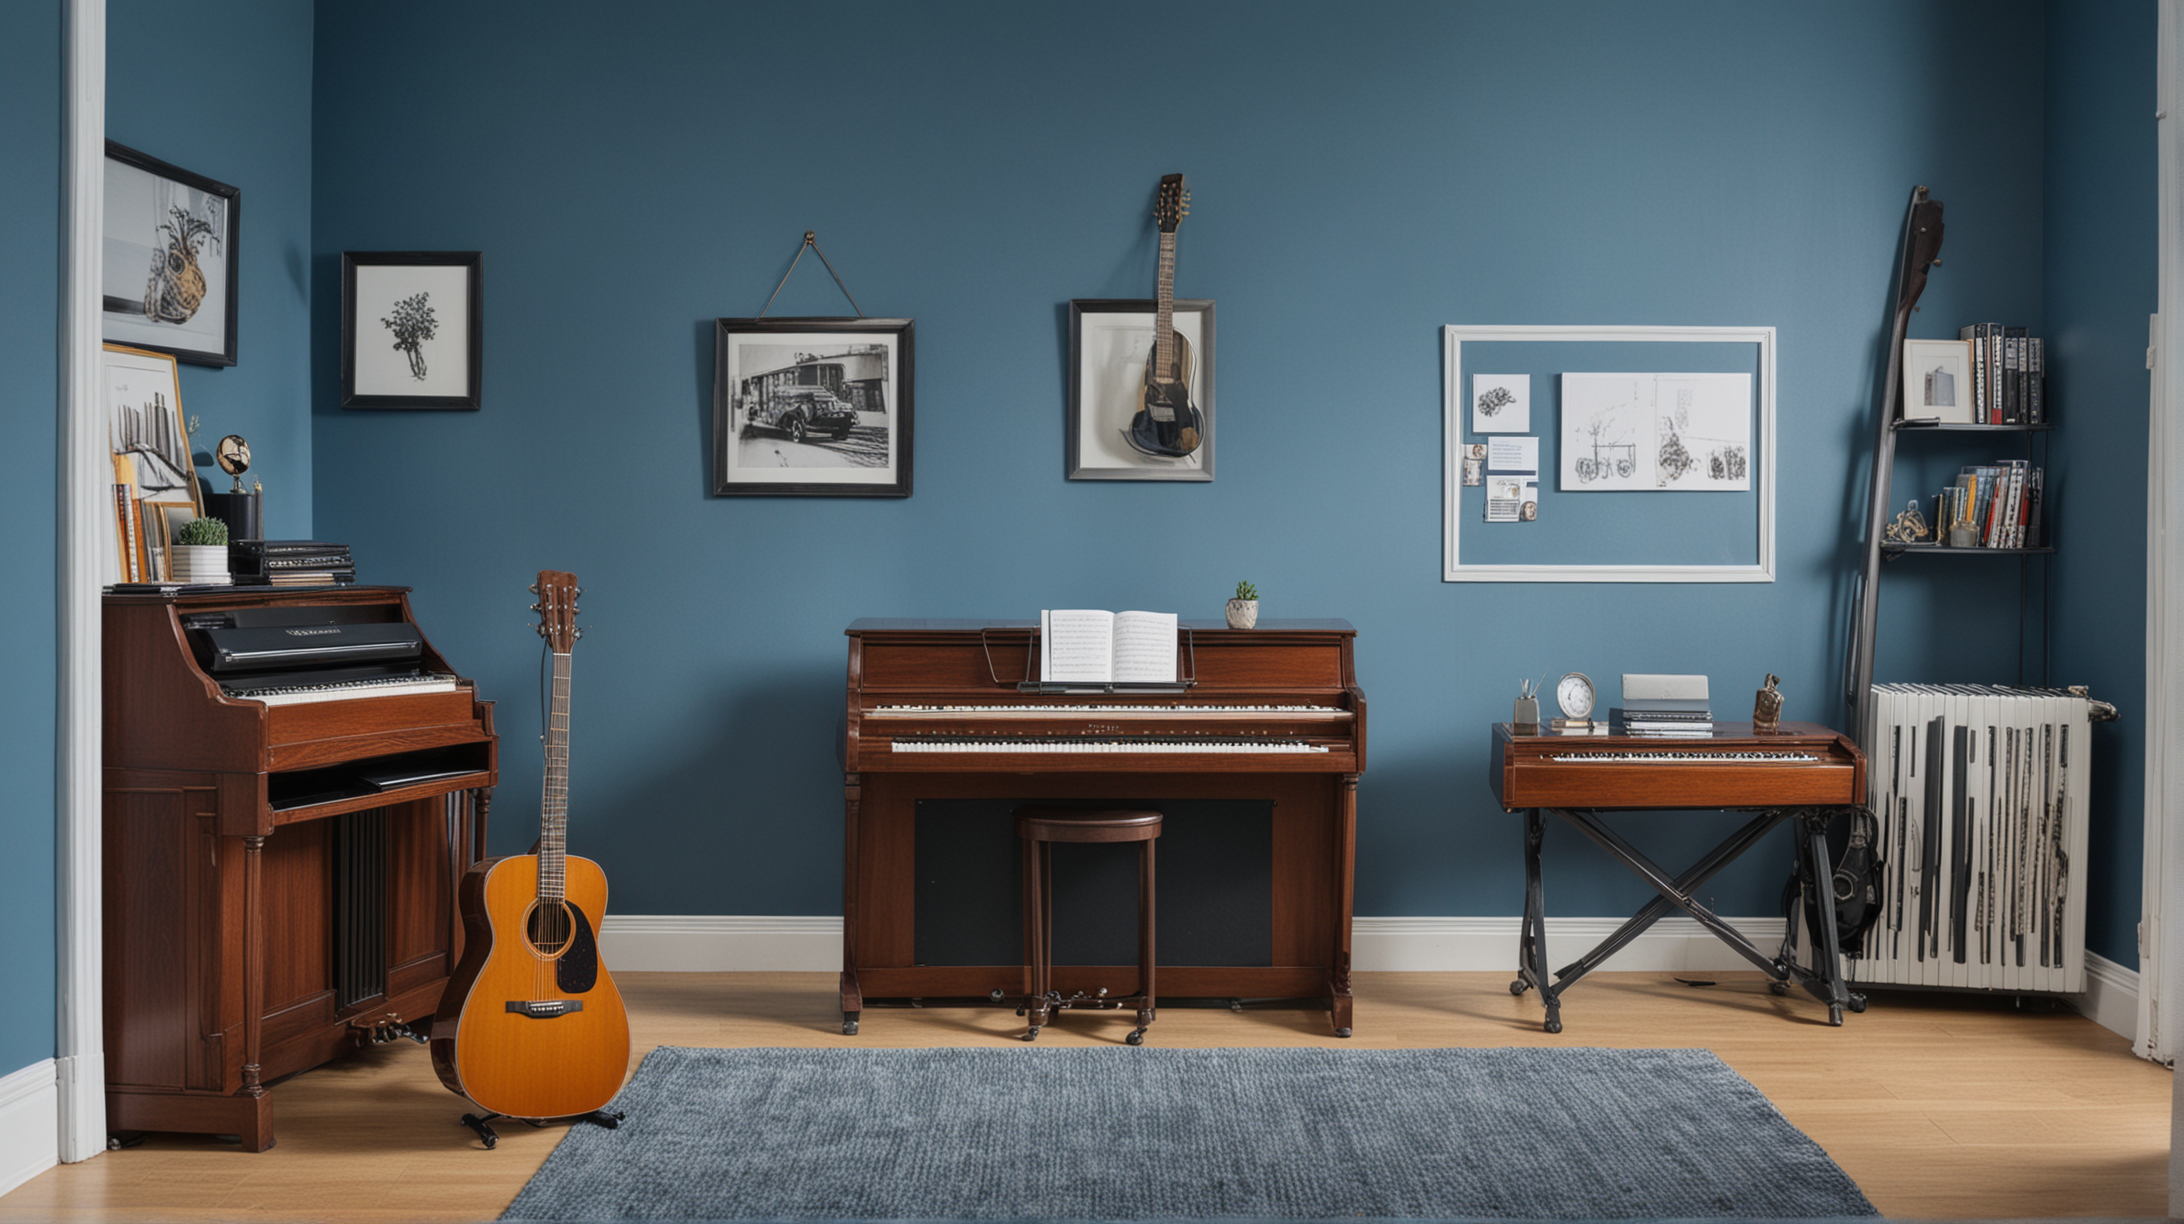 A pleasant looking office with a guitar in a stand and a piano keyboard next to it. Basic blue walls and well lit.